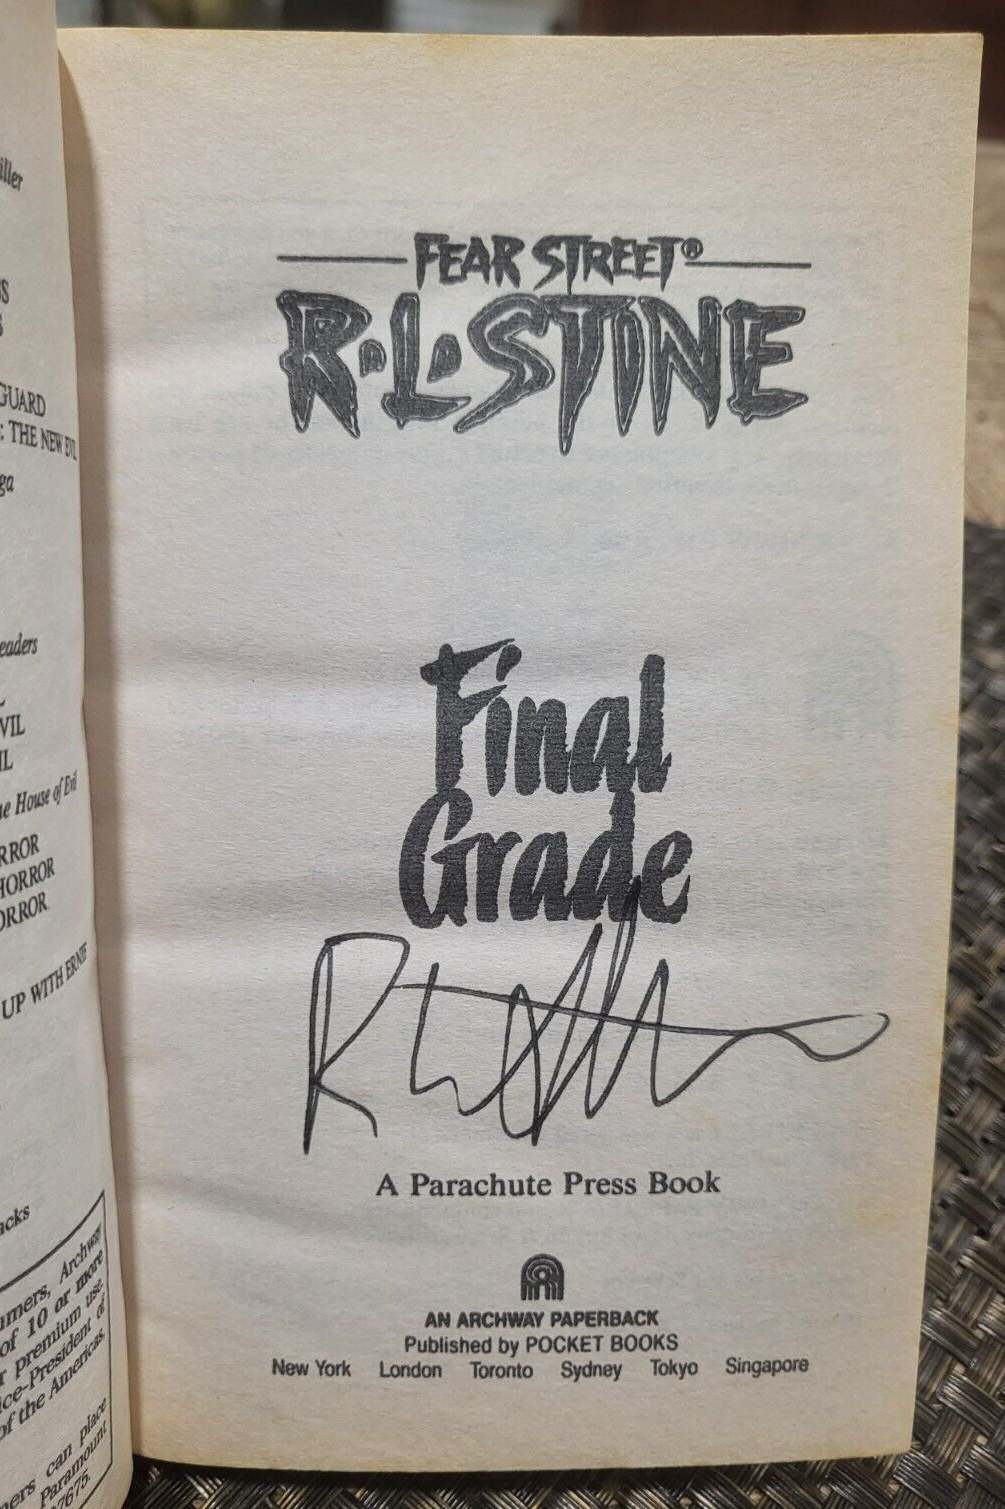 RL STINE THE FEAR STREET FINAL GRADE SIGNED AUTOGRAPH BOOK W/COA AUTHENTIC